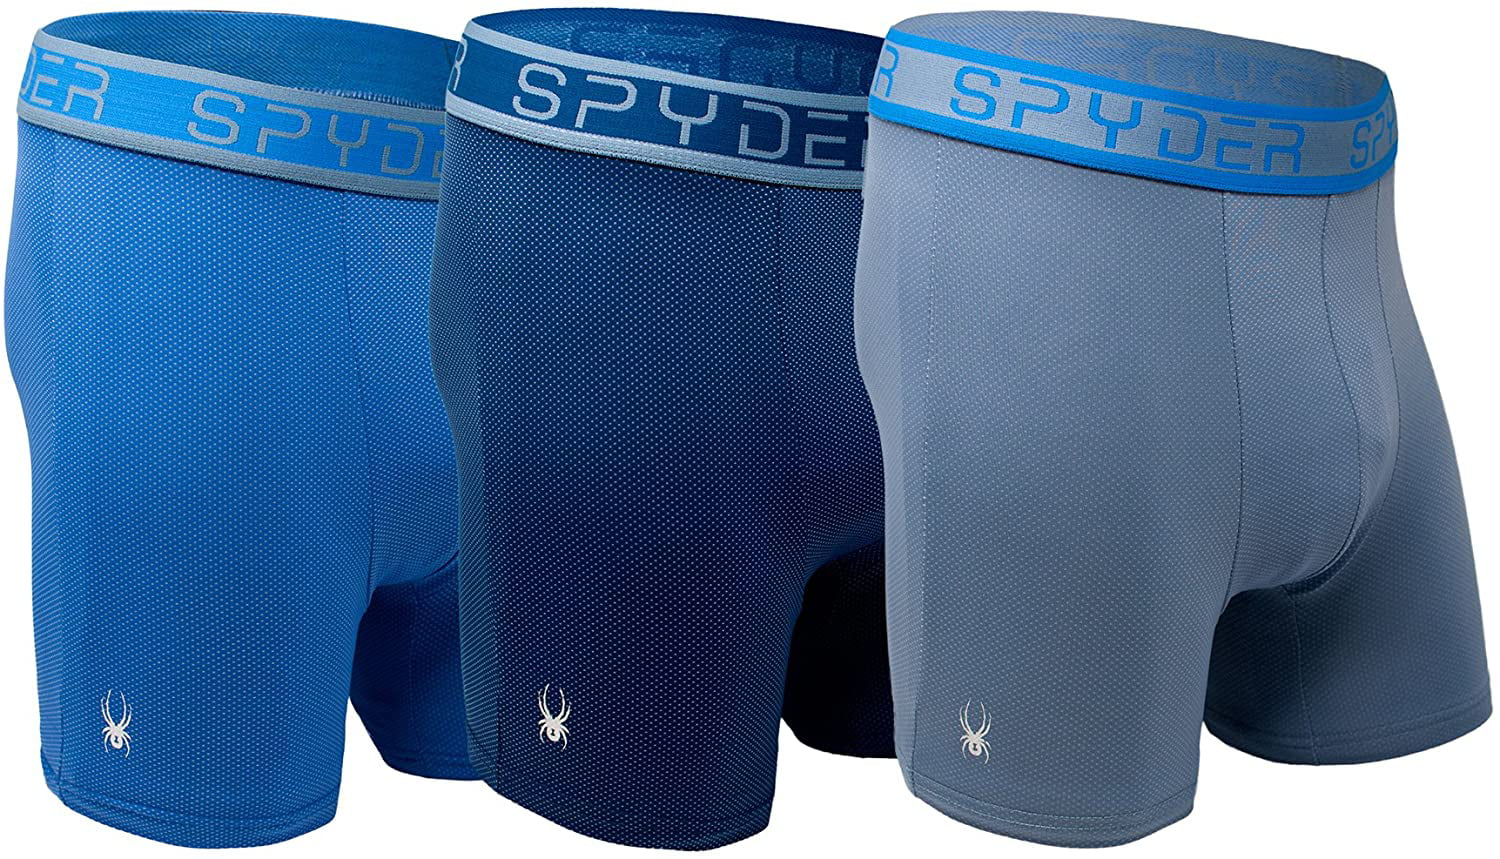 Spyder Mens Boxer Briefs Performance Sports Compression Shorts Athletic Mens Underwear 3 Pack for Men Mens Boxers Brief